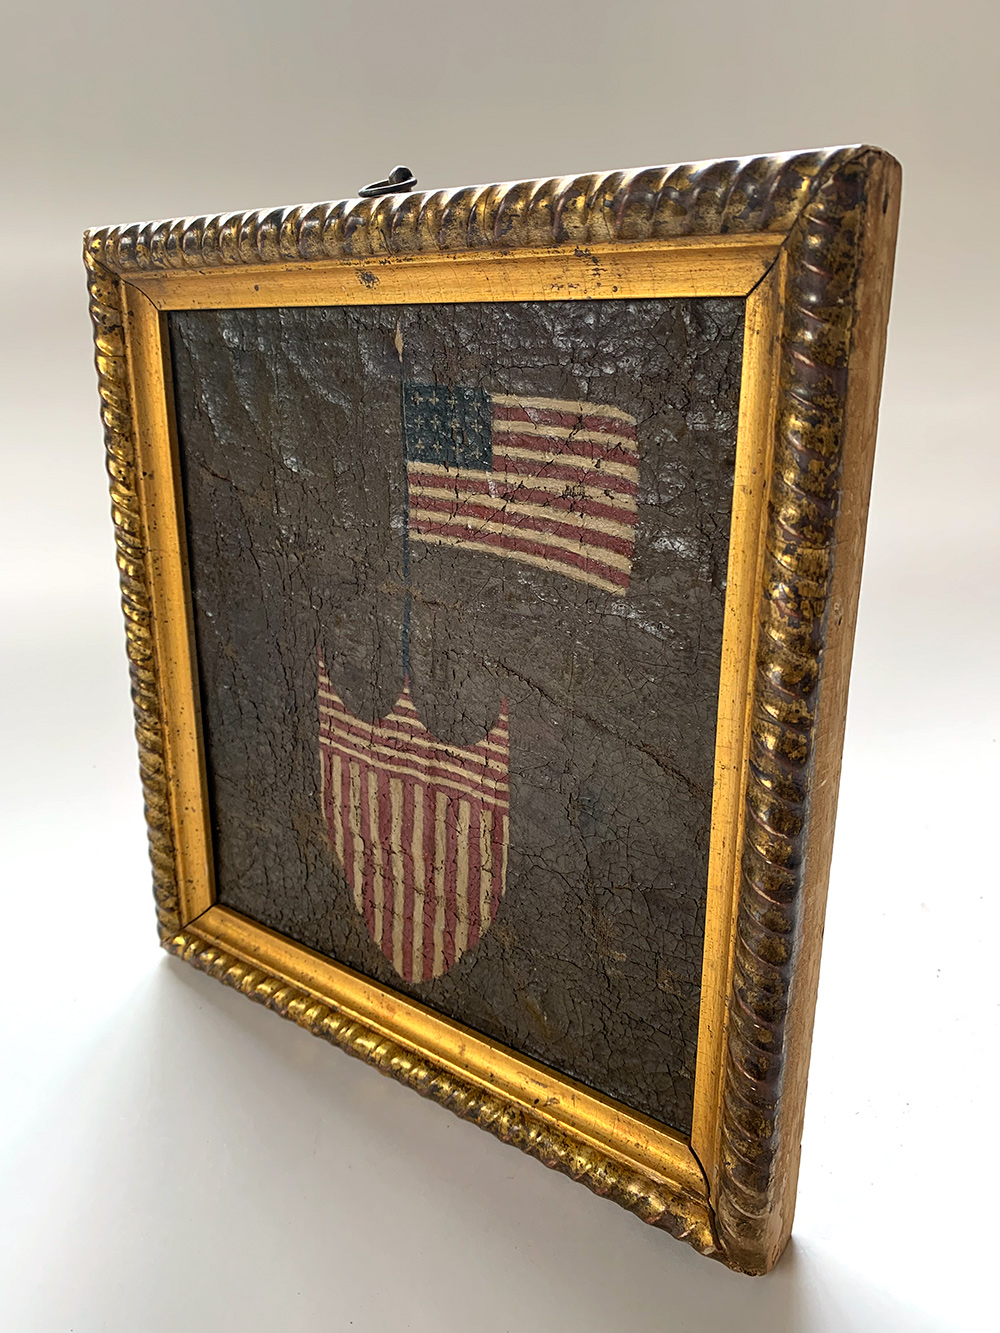 civil war backpack fragment with 12 star secession flag